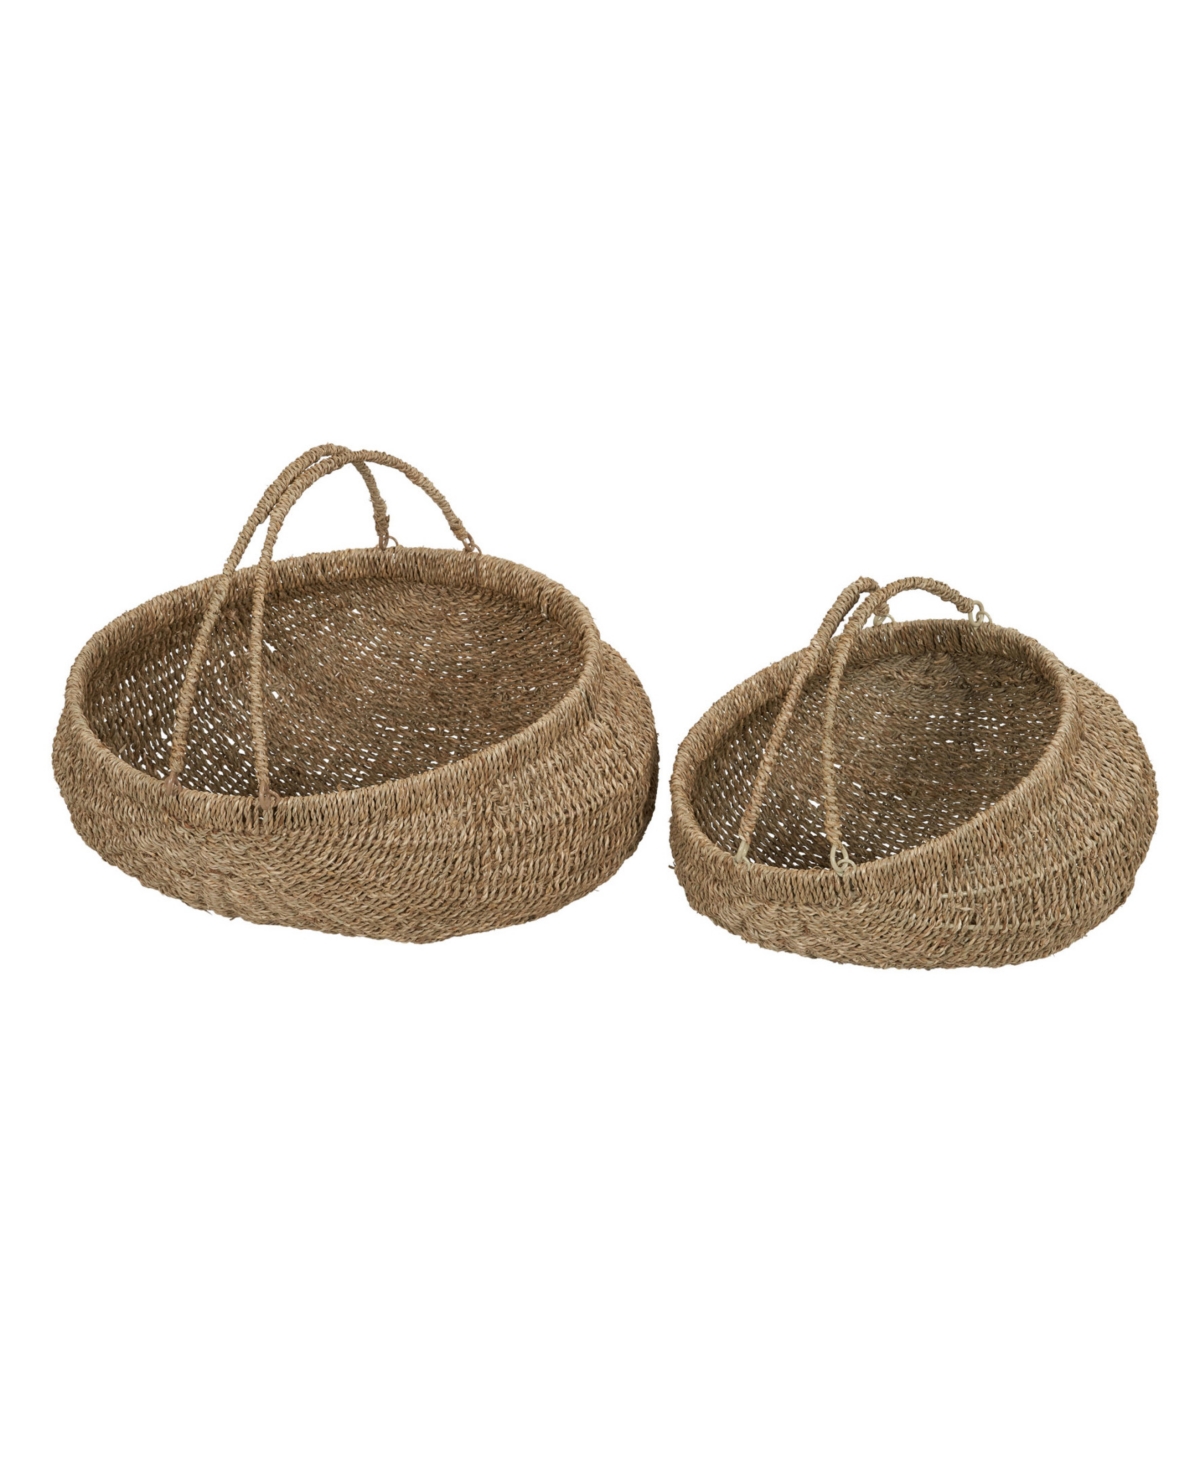 Seagrass Baskets Set of 2 with Handles - Natural